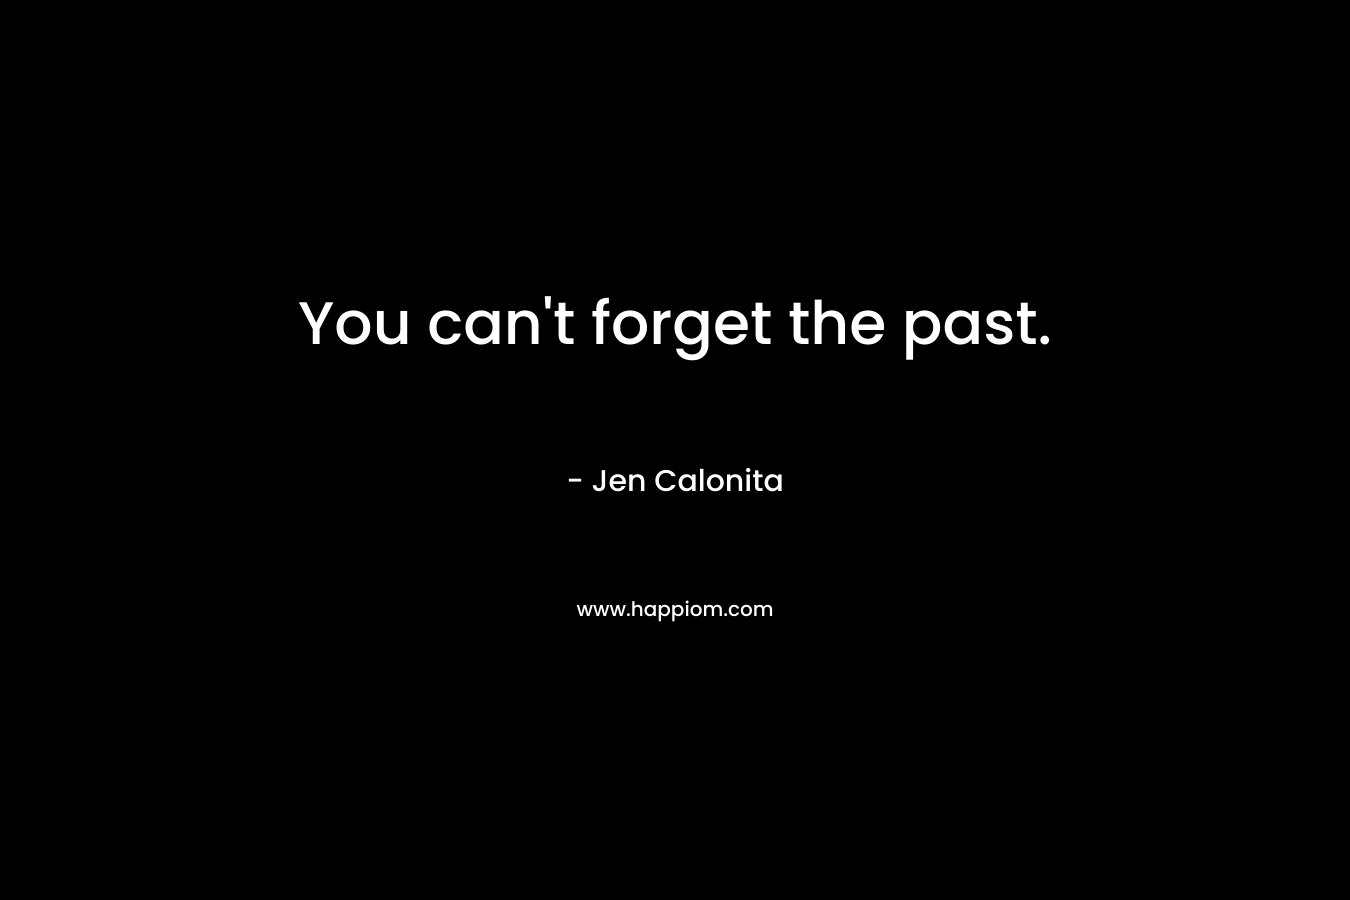 You can’t forget the past. – Jen Calonita